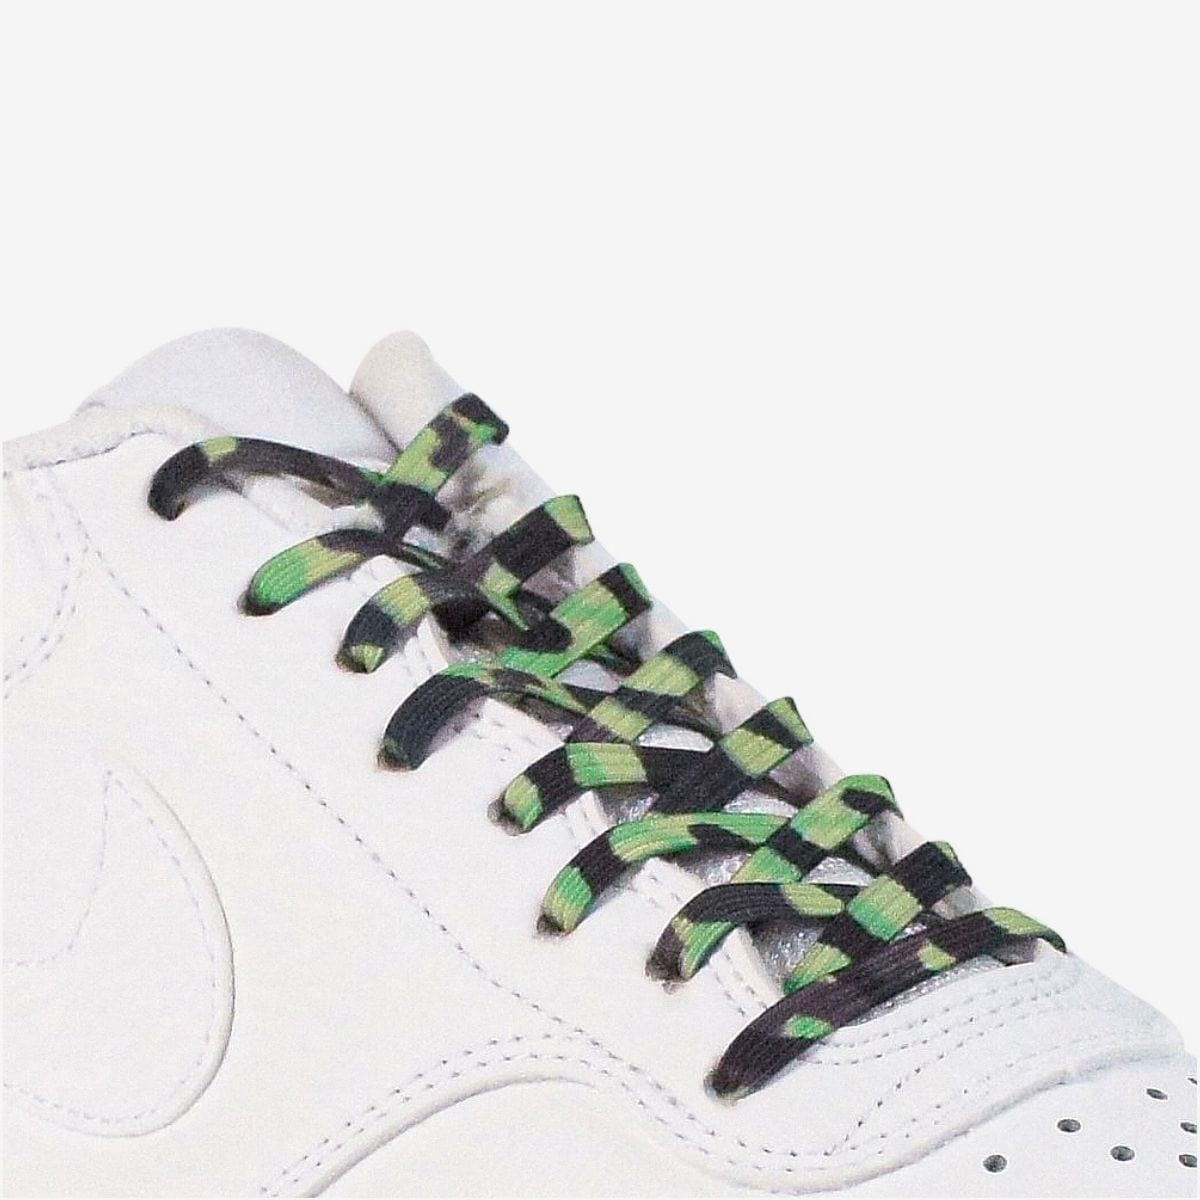 different-ways-to-lace-shoes-with-black-green-camo-elastic-shoelaces-on-white-kicks